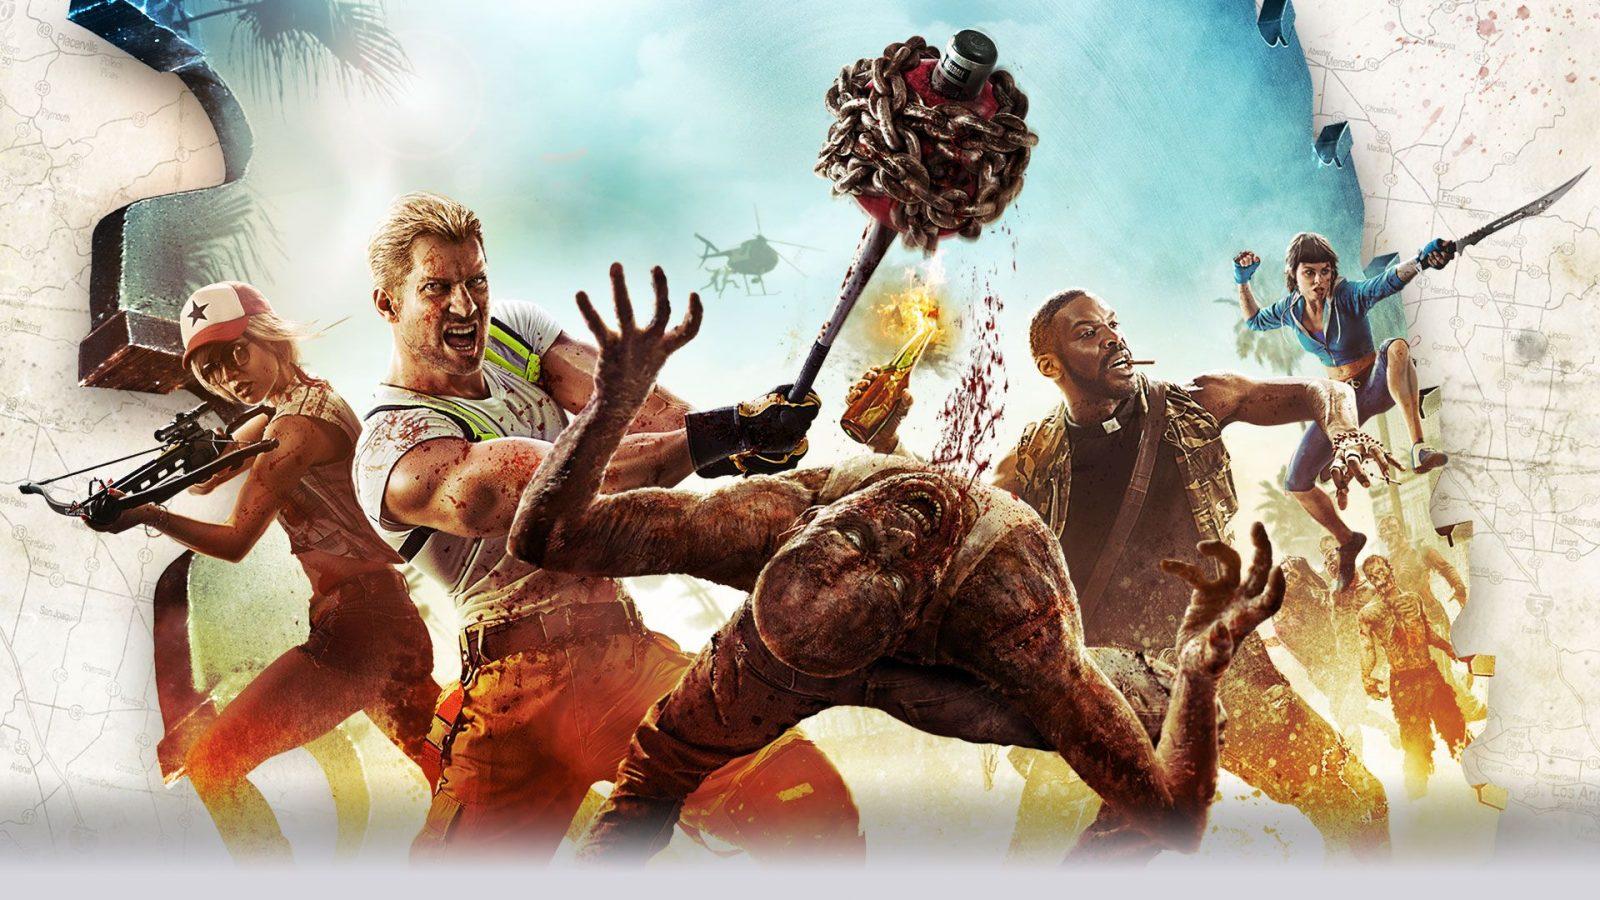 Does Dead Island 2 Have Crossplay? - Insider Gaming